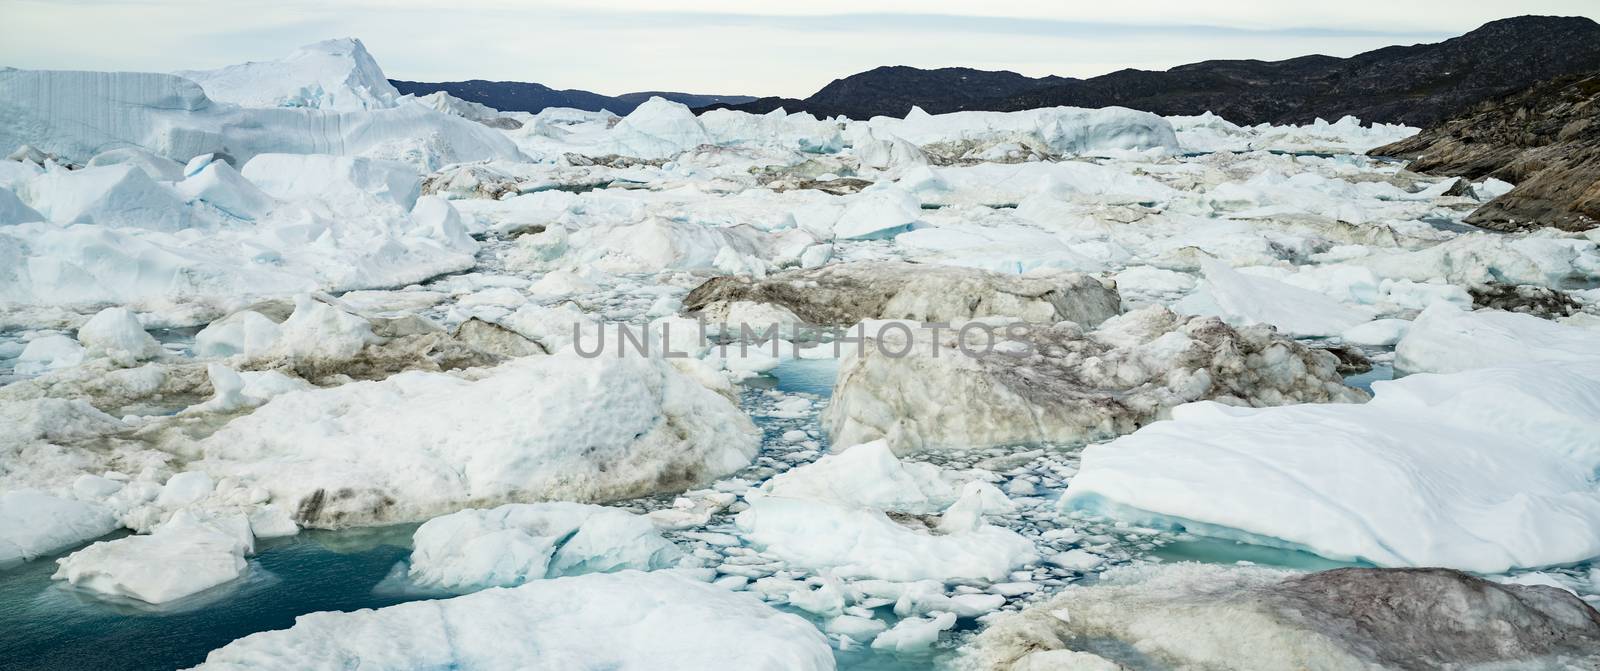 Climate Change and Global Warming - Icebergs and from melting glacier in icefjord in Ilulissat, Greenland. Panoramic banner photo of arctic nature ice landscape.